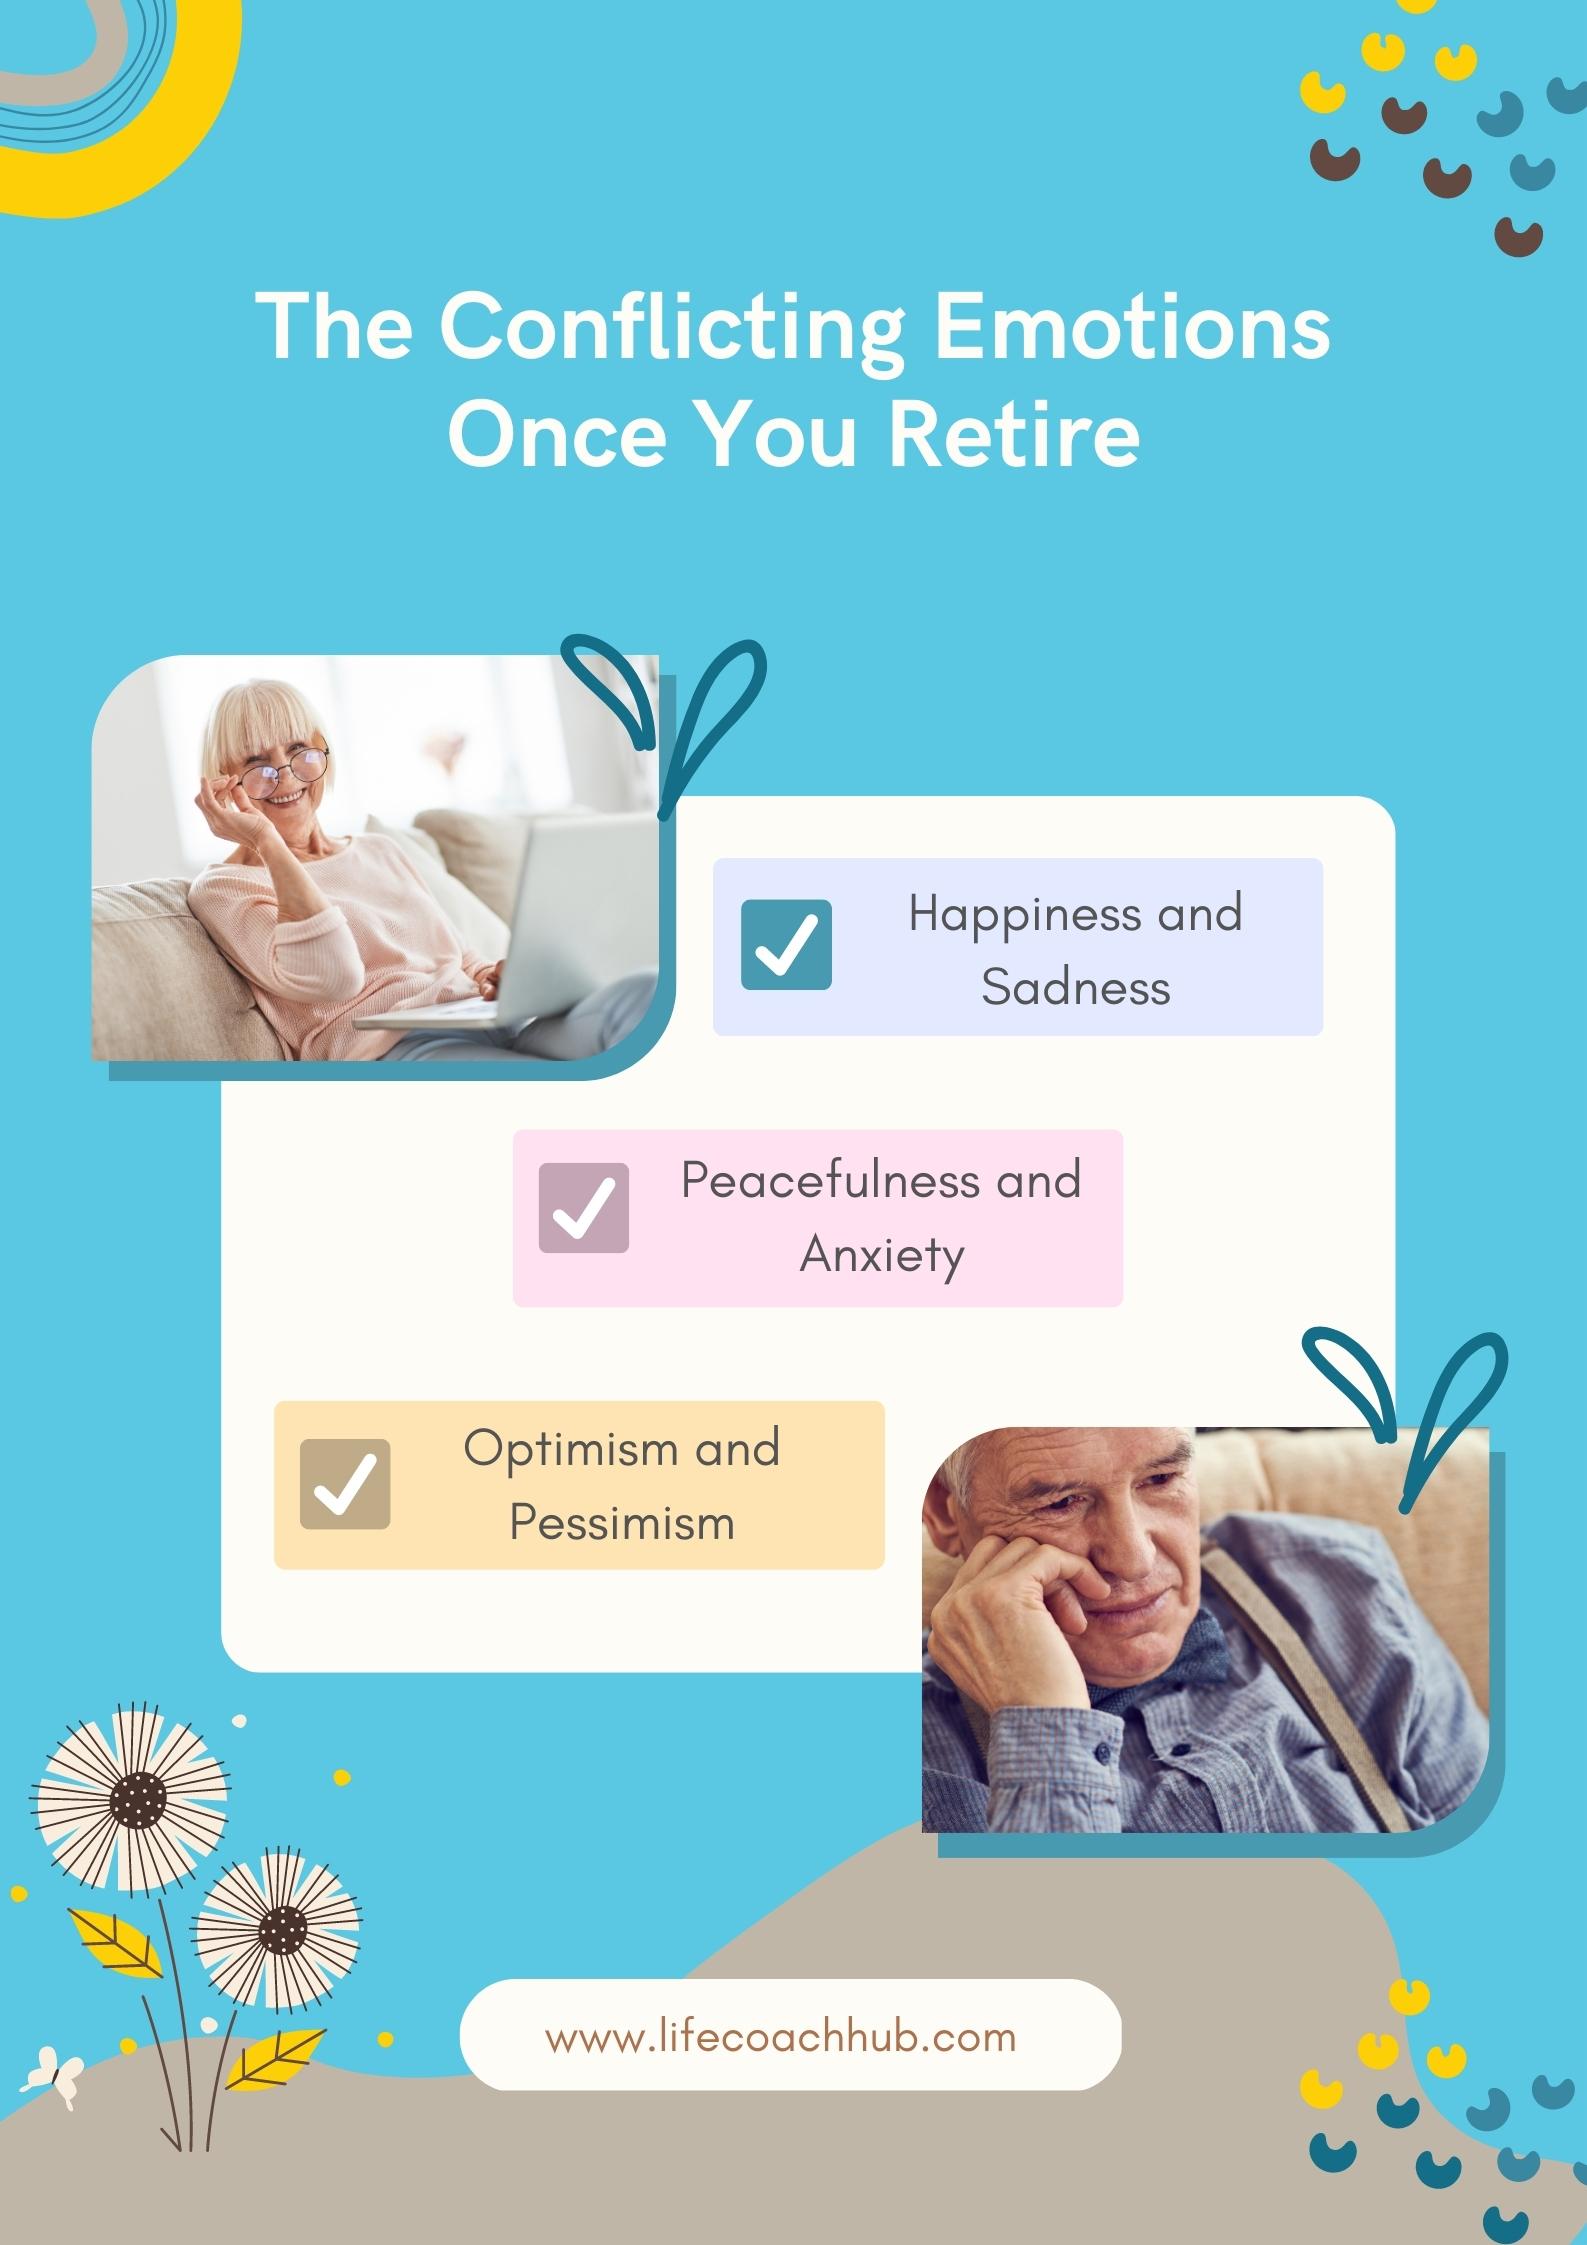 Be prepared for these conflicting emotions when you retire